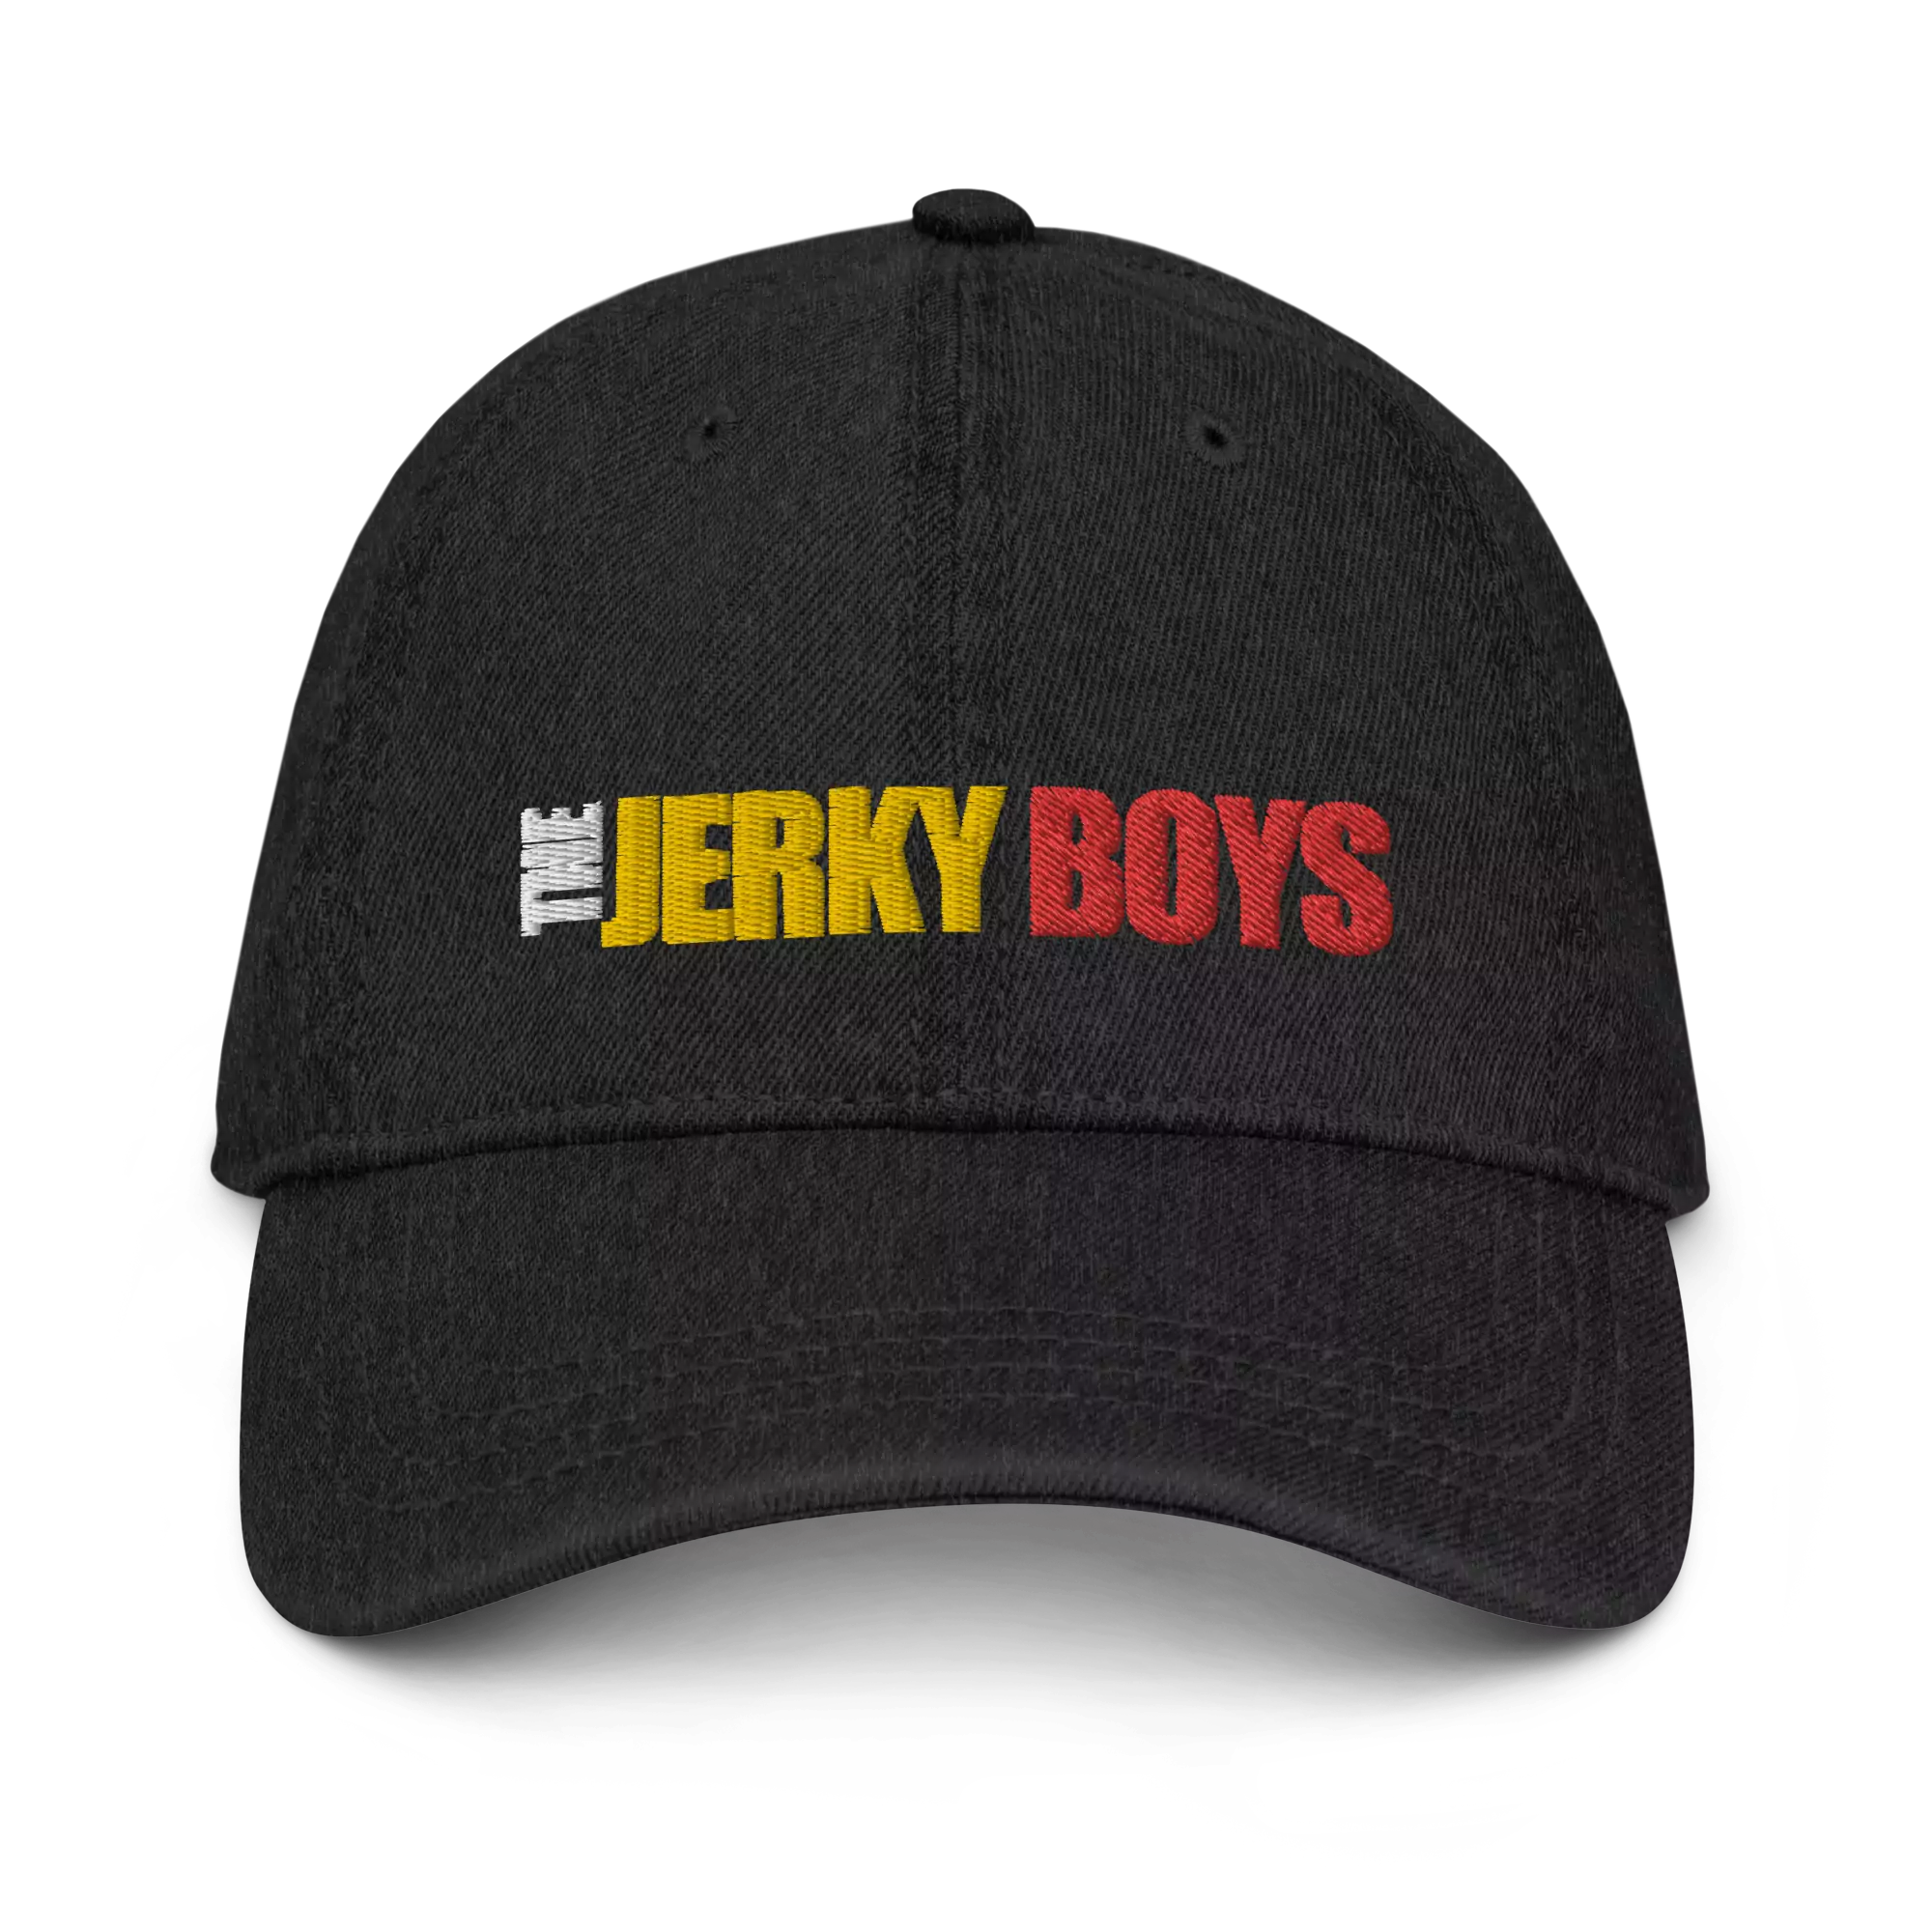 the jerky boys logo dad hat front